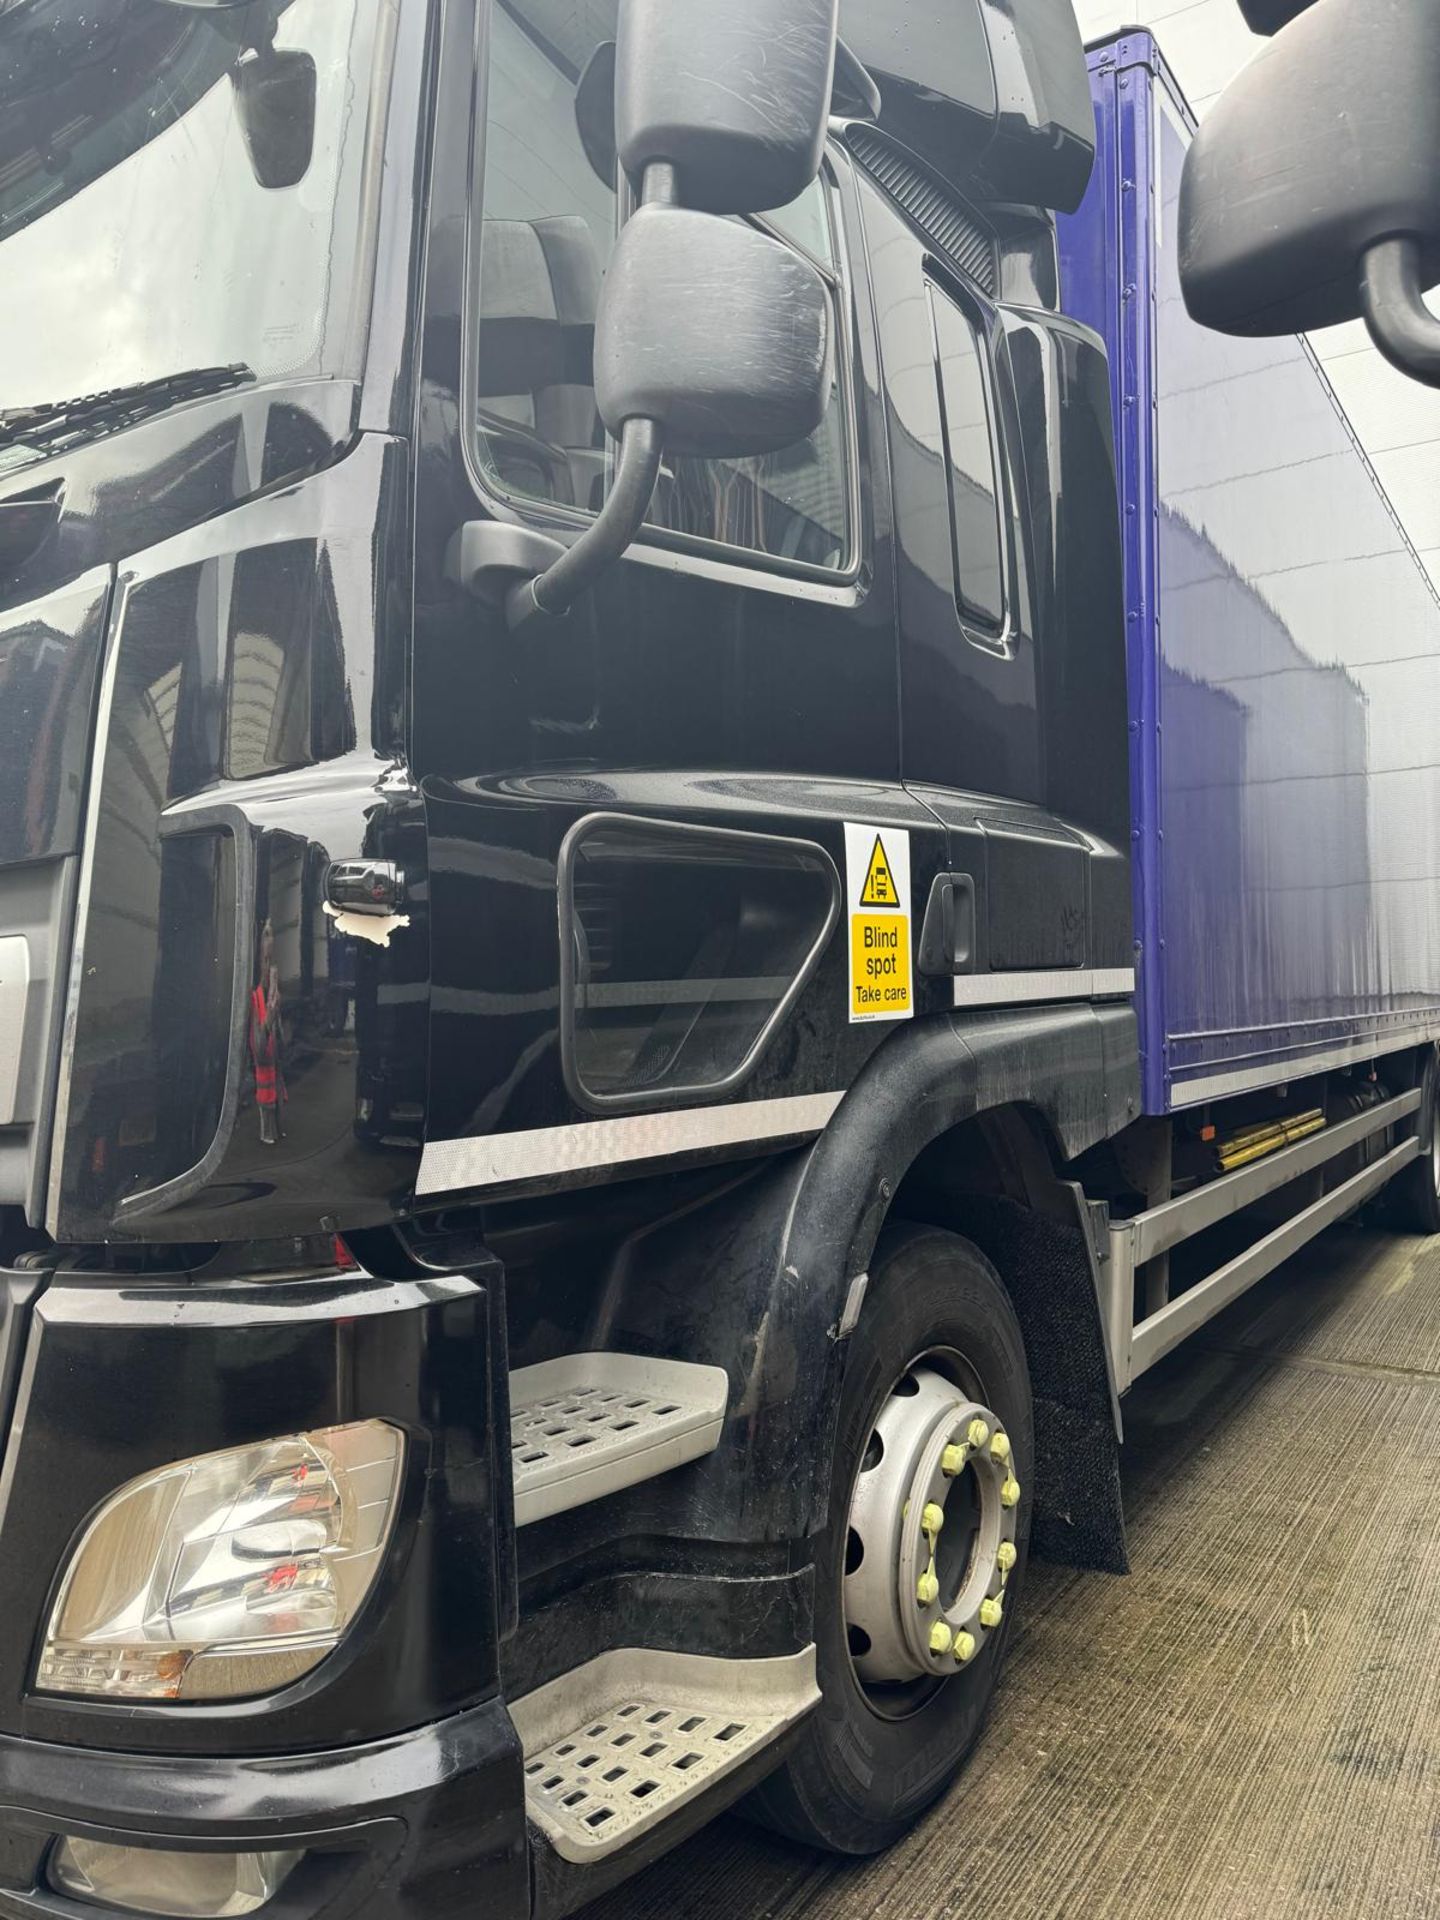 2019, DAF CF 260 FA (Ex-Fleet Owned & Maintained) - FN69 AXG (18 Ton Rigid Truck with Tail Lift) - Bild 3 aus 7